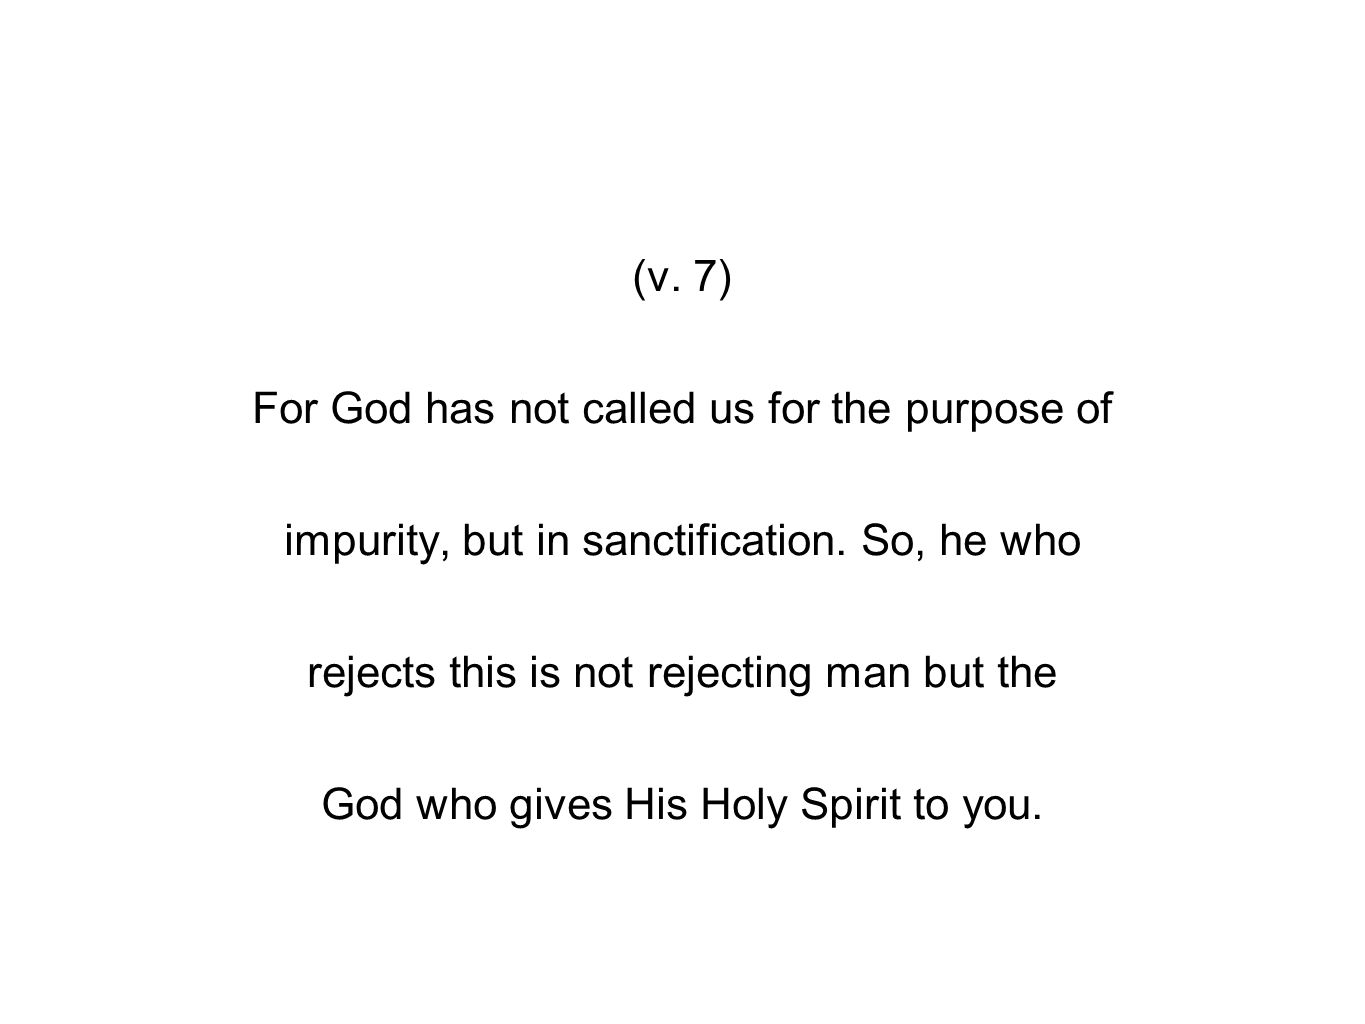 (v. 7) For God has not called us for the purpose of impurity, but in sanctification.